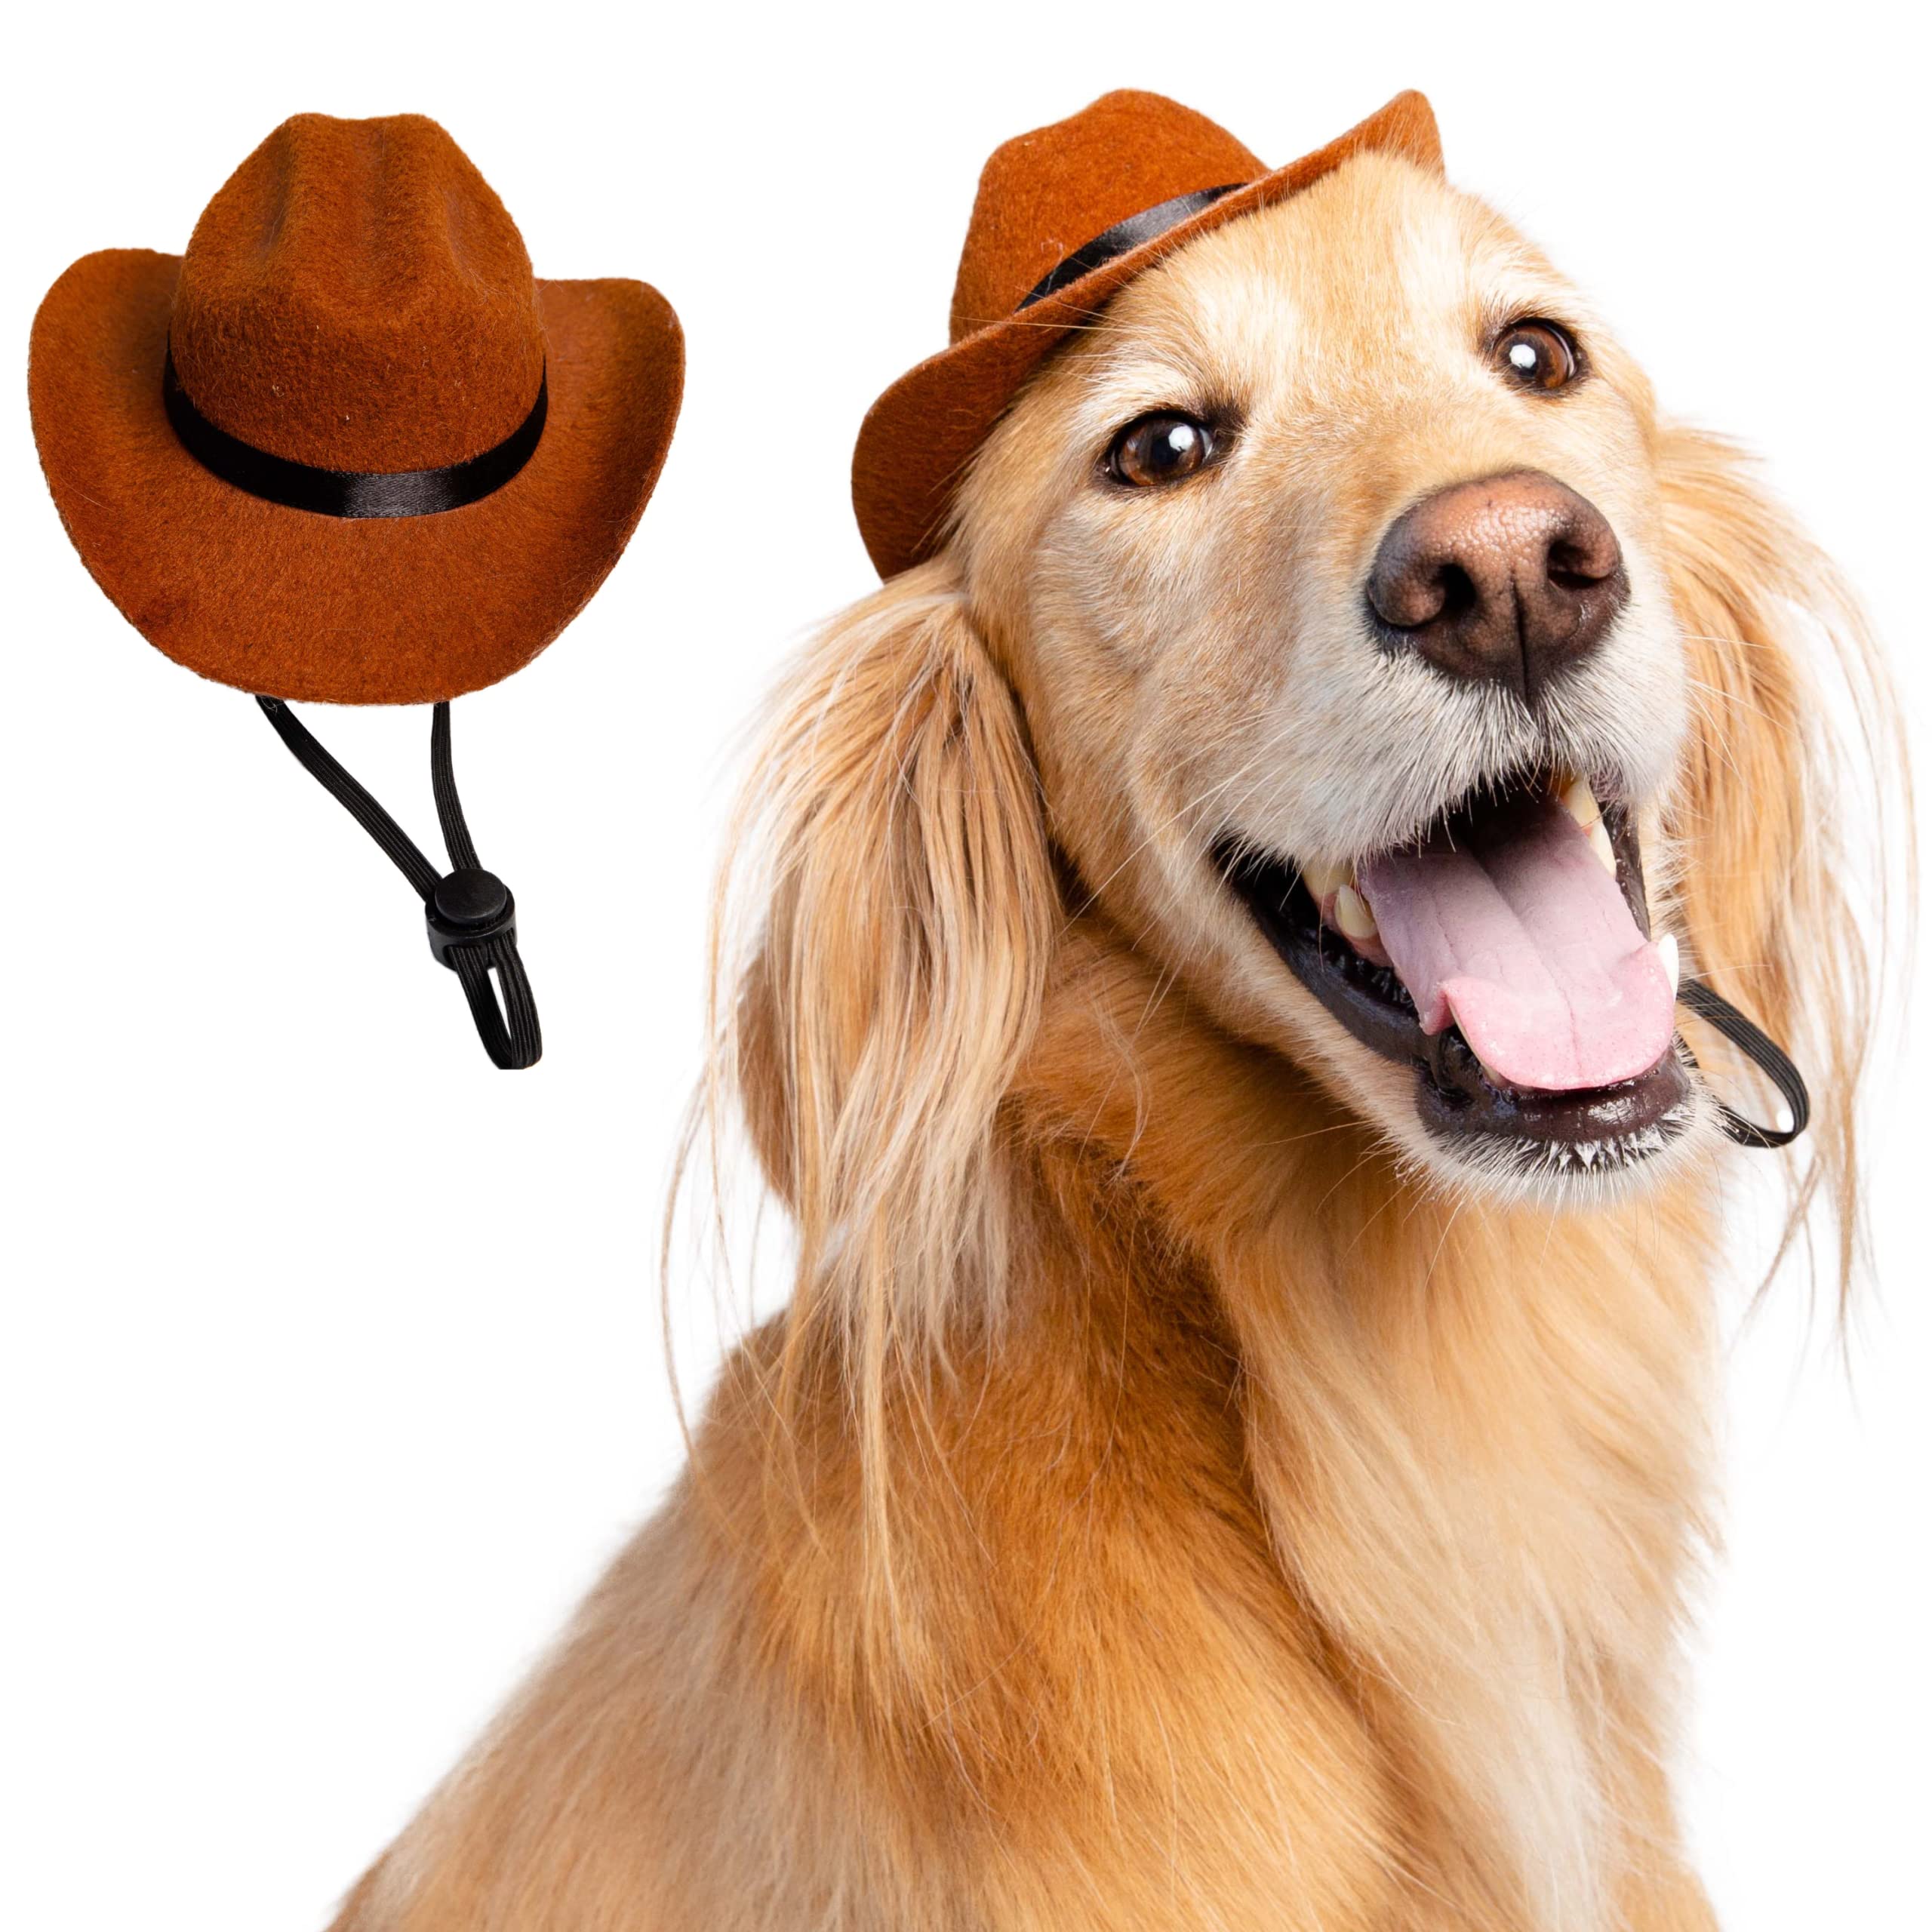 Pet Krewe Cowboy Hat Dog Costume for Cats and Dogs | Pet Costume for Dogs 1st Birthday, National Cat Day & Celebrations | Halloween Outfit for Small and Large Cats & Dogs  - Like New